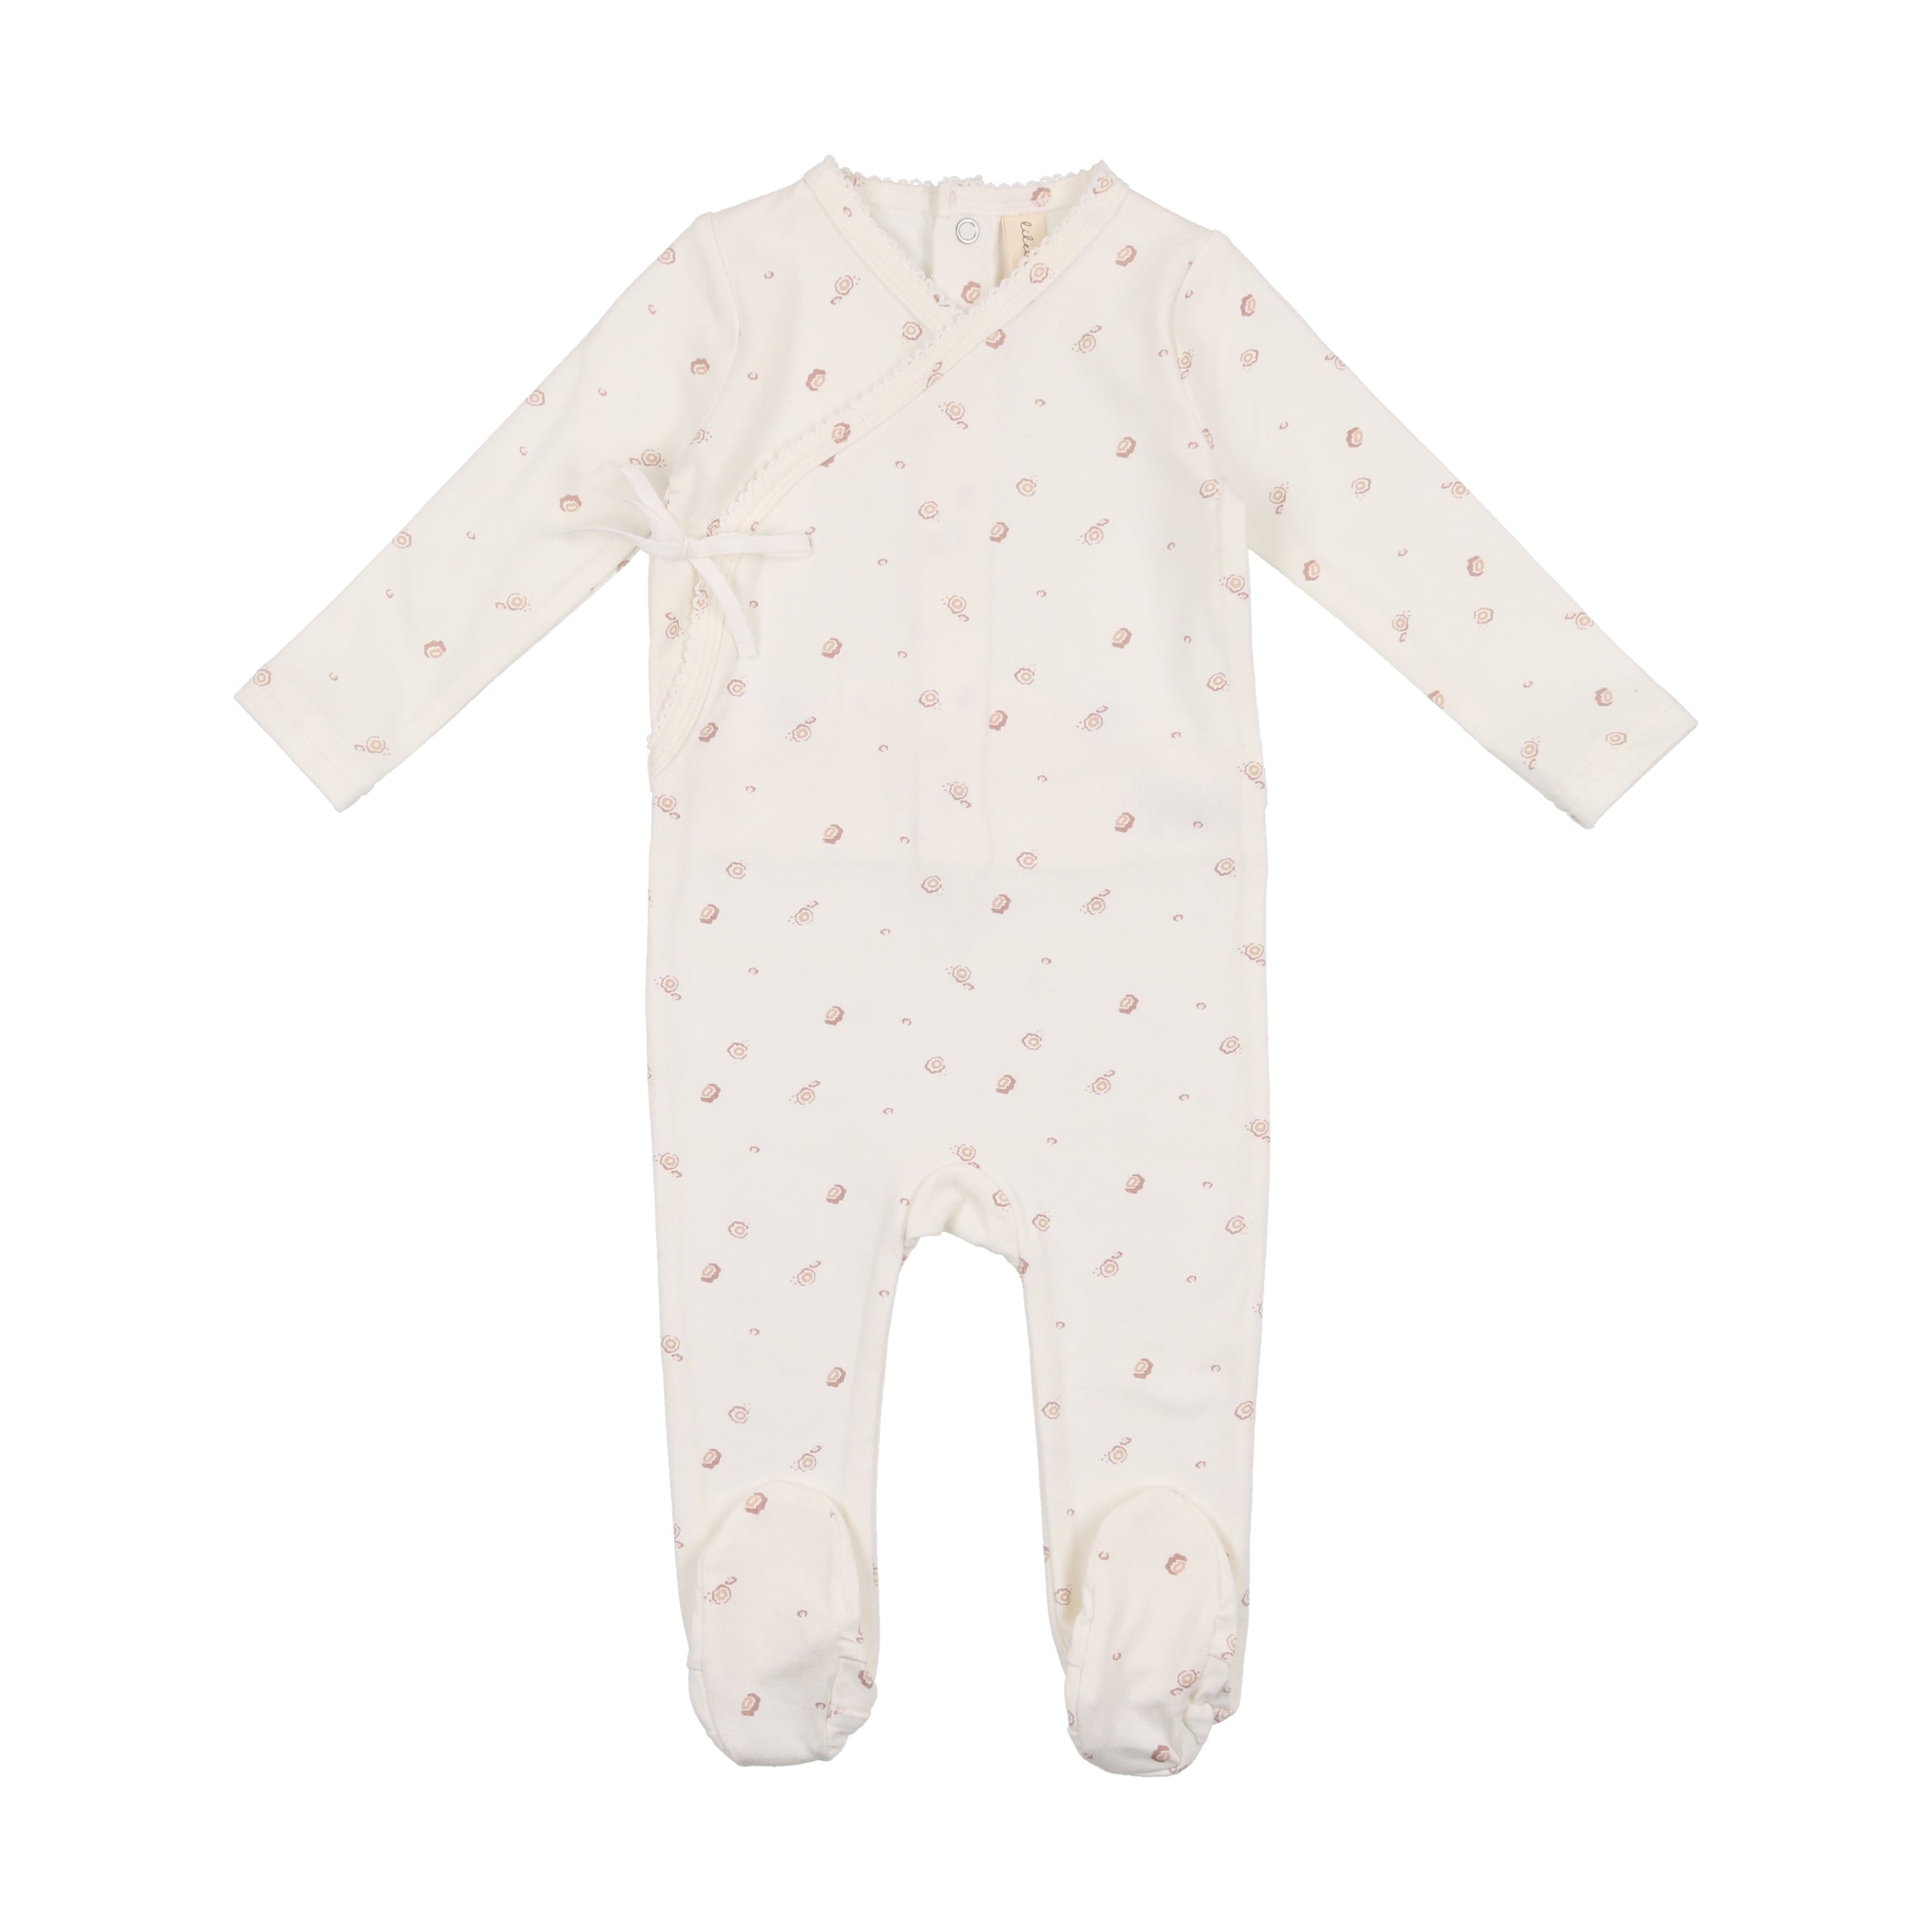 LIL LEGS BABY PRINTED WRAPOVER FOOTIE